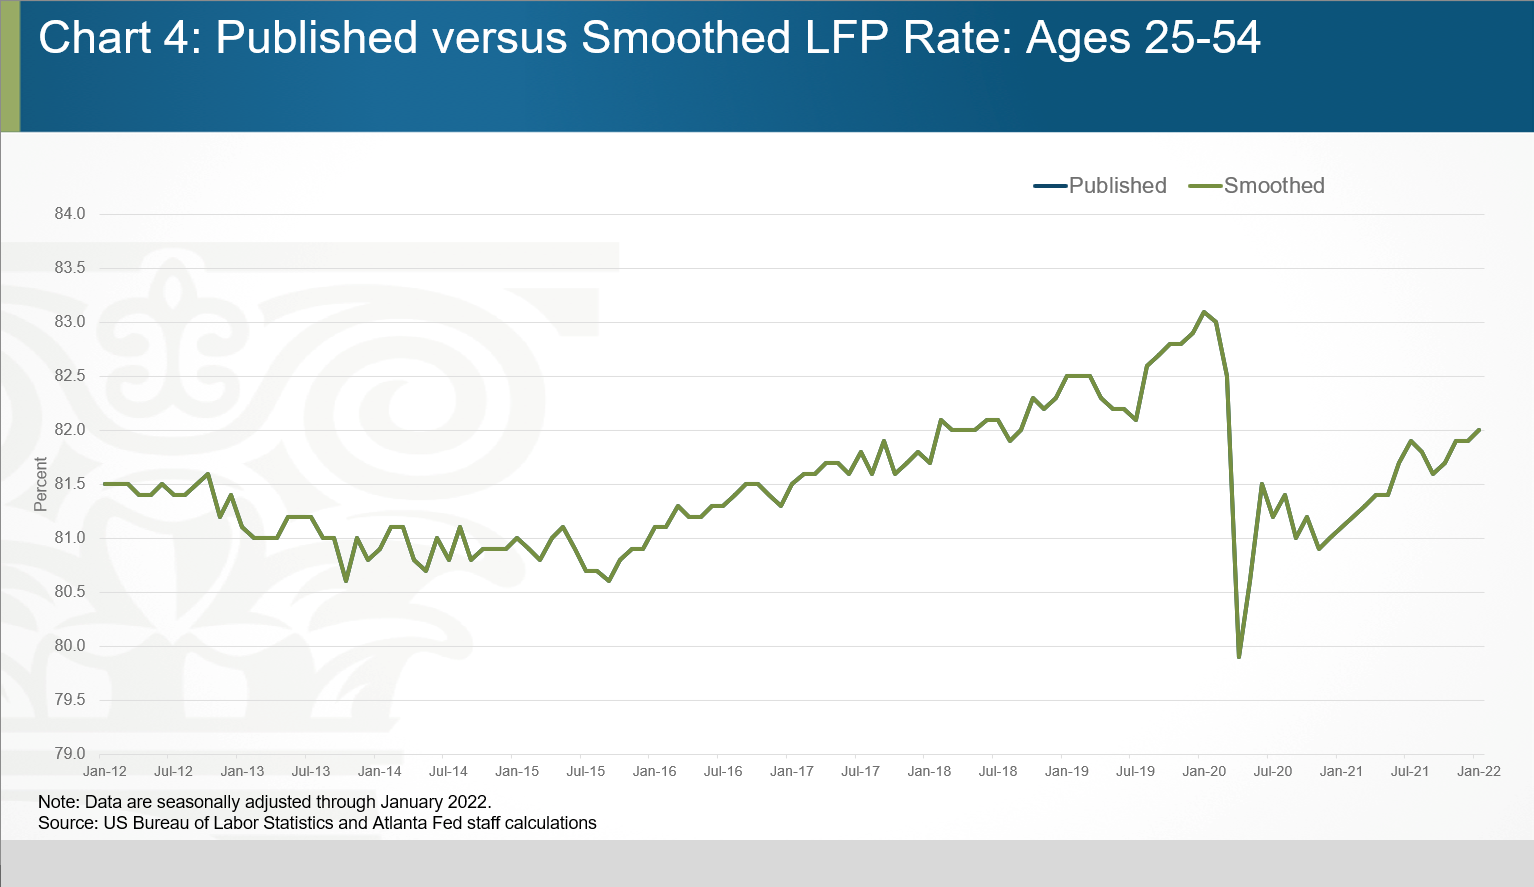 Chart 04 of 06: Published versus Smoothed LFP Rate: Ages 25-54